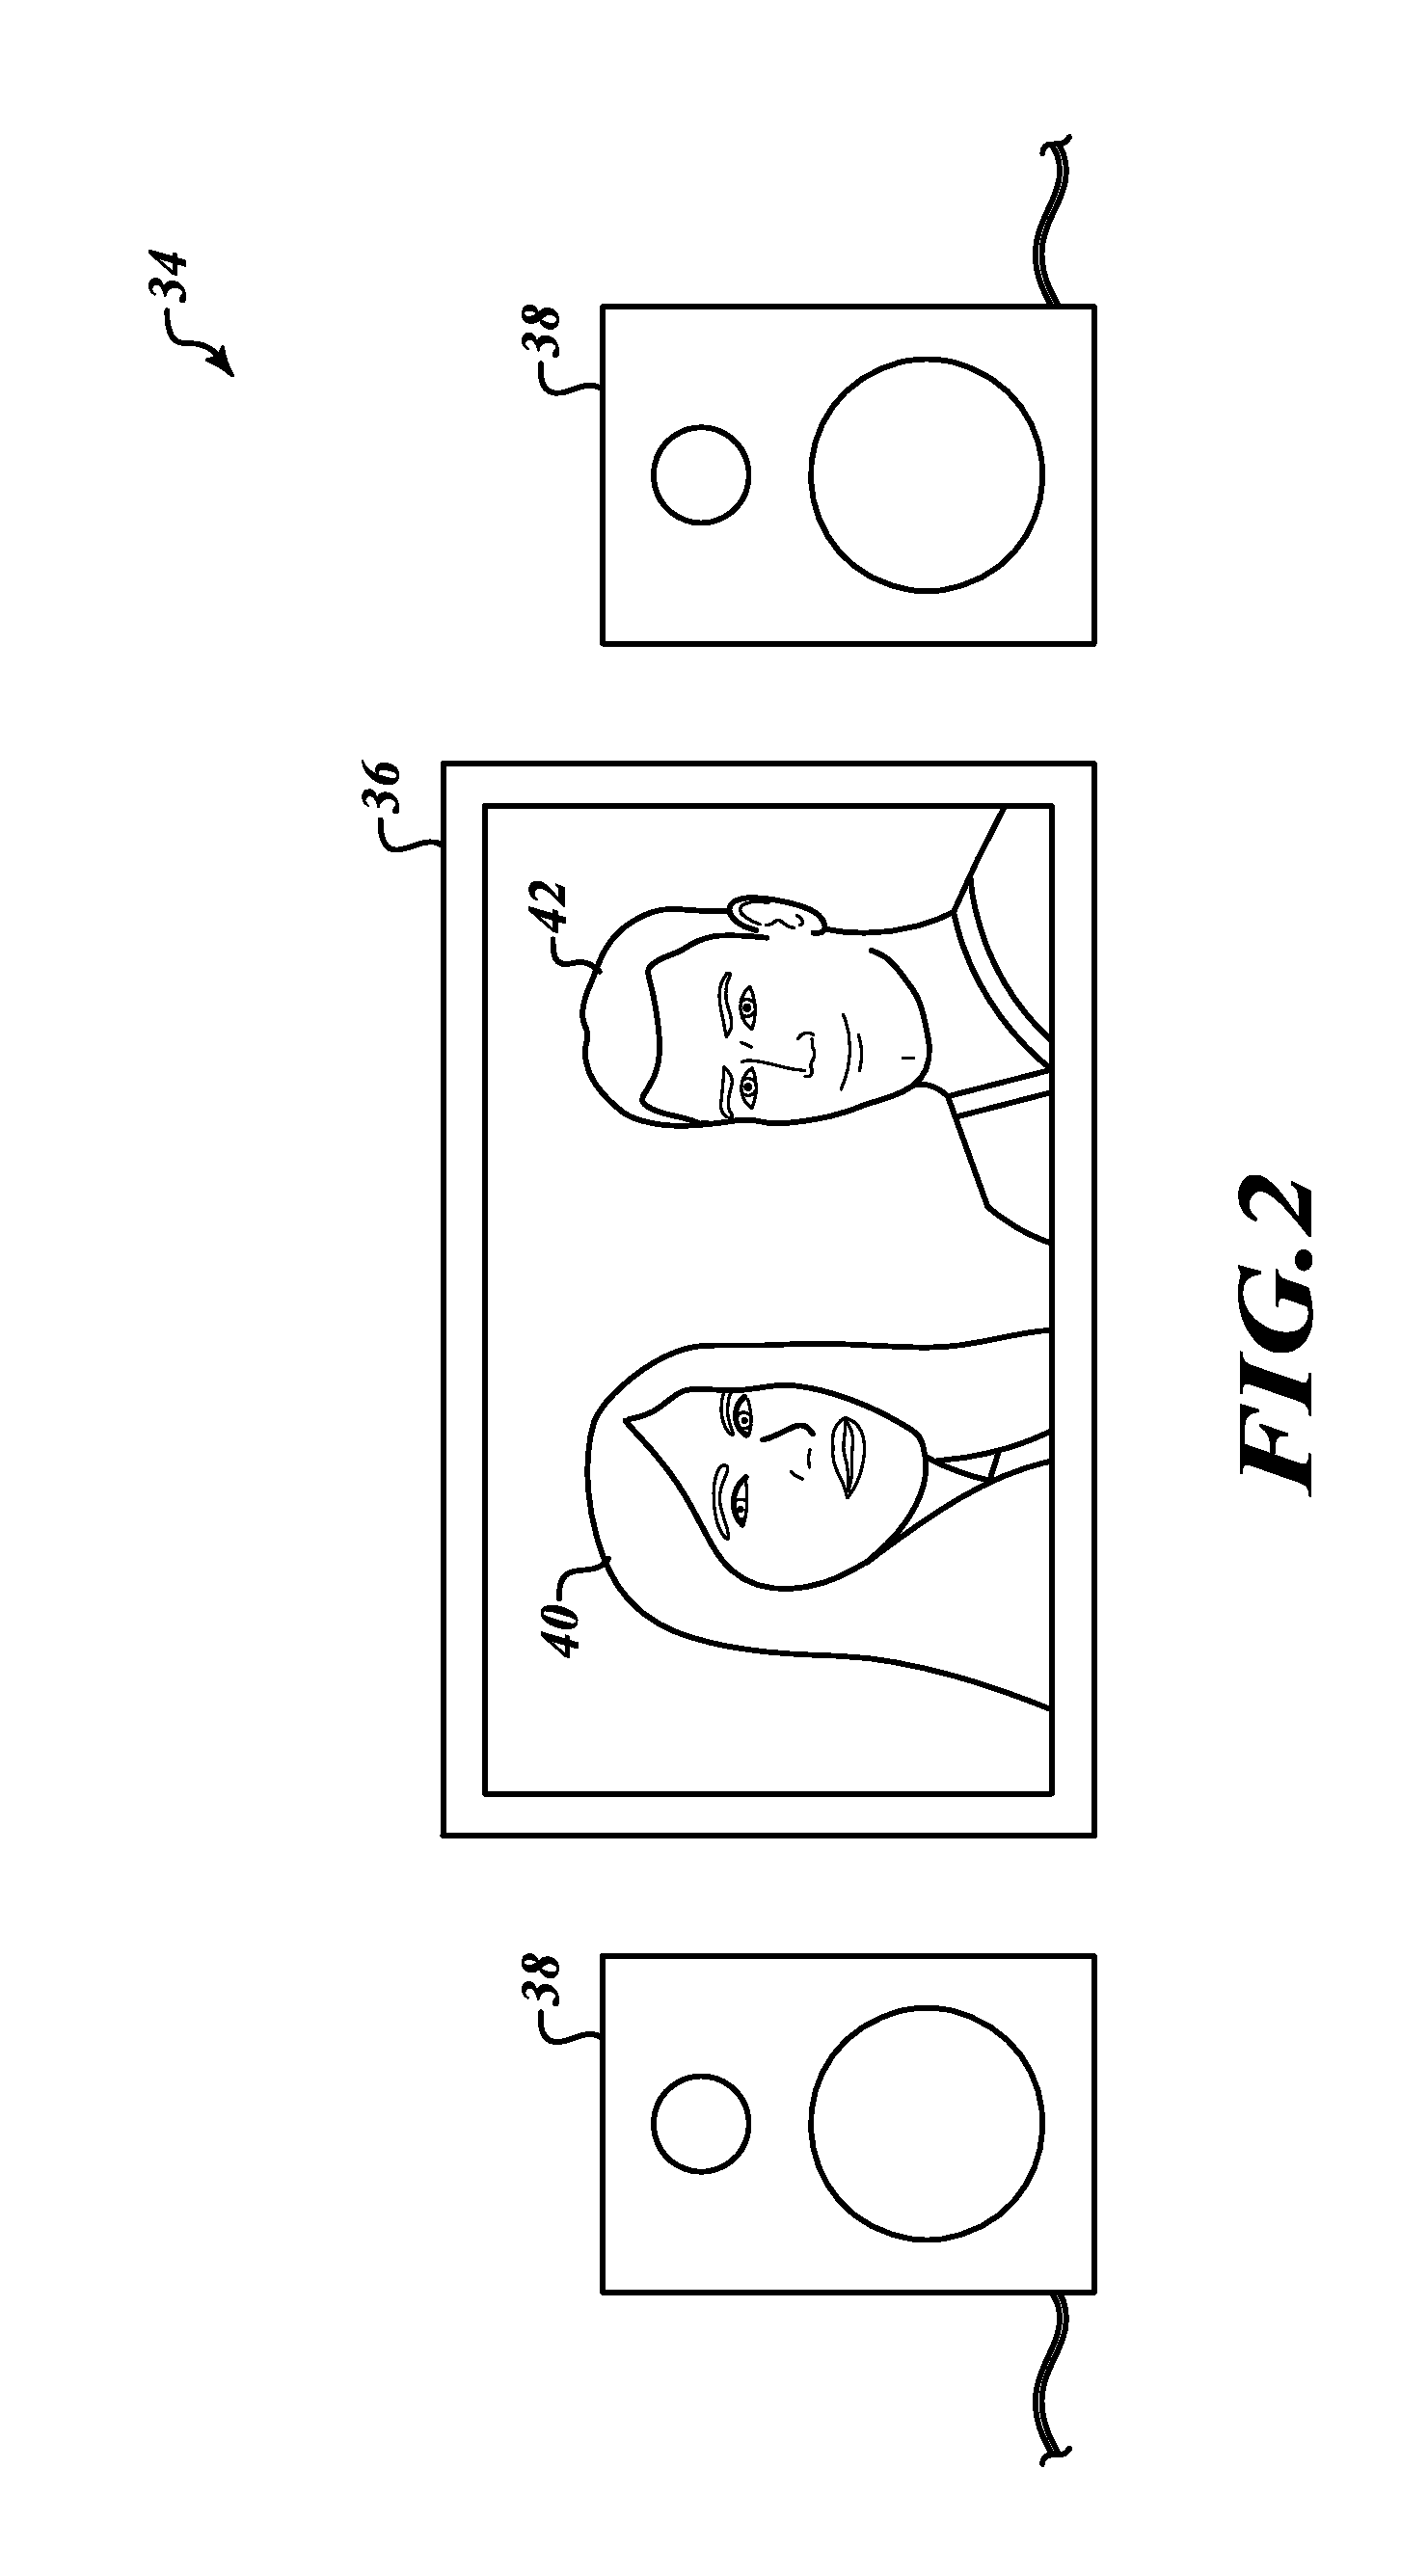 Video and audio processing based multimedia synchronization system and method of creating the same